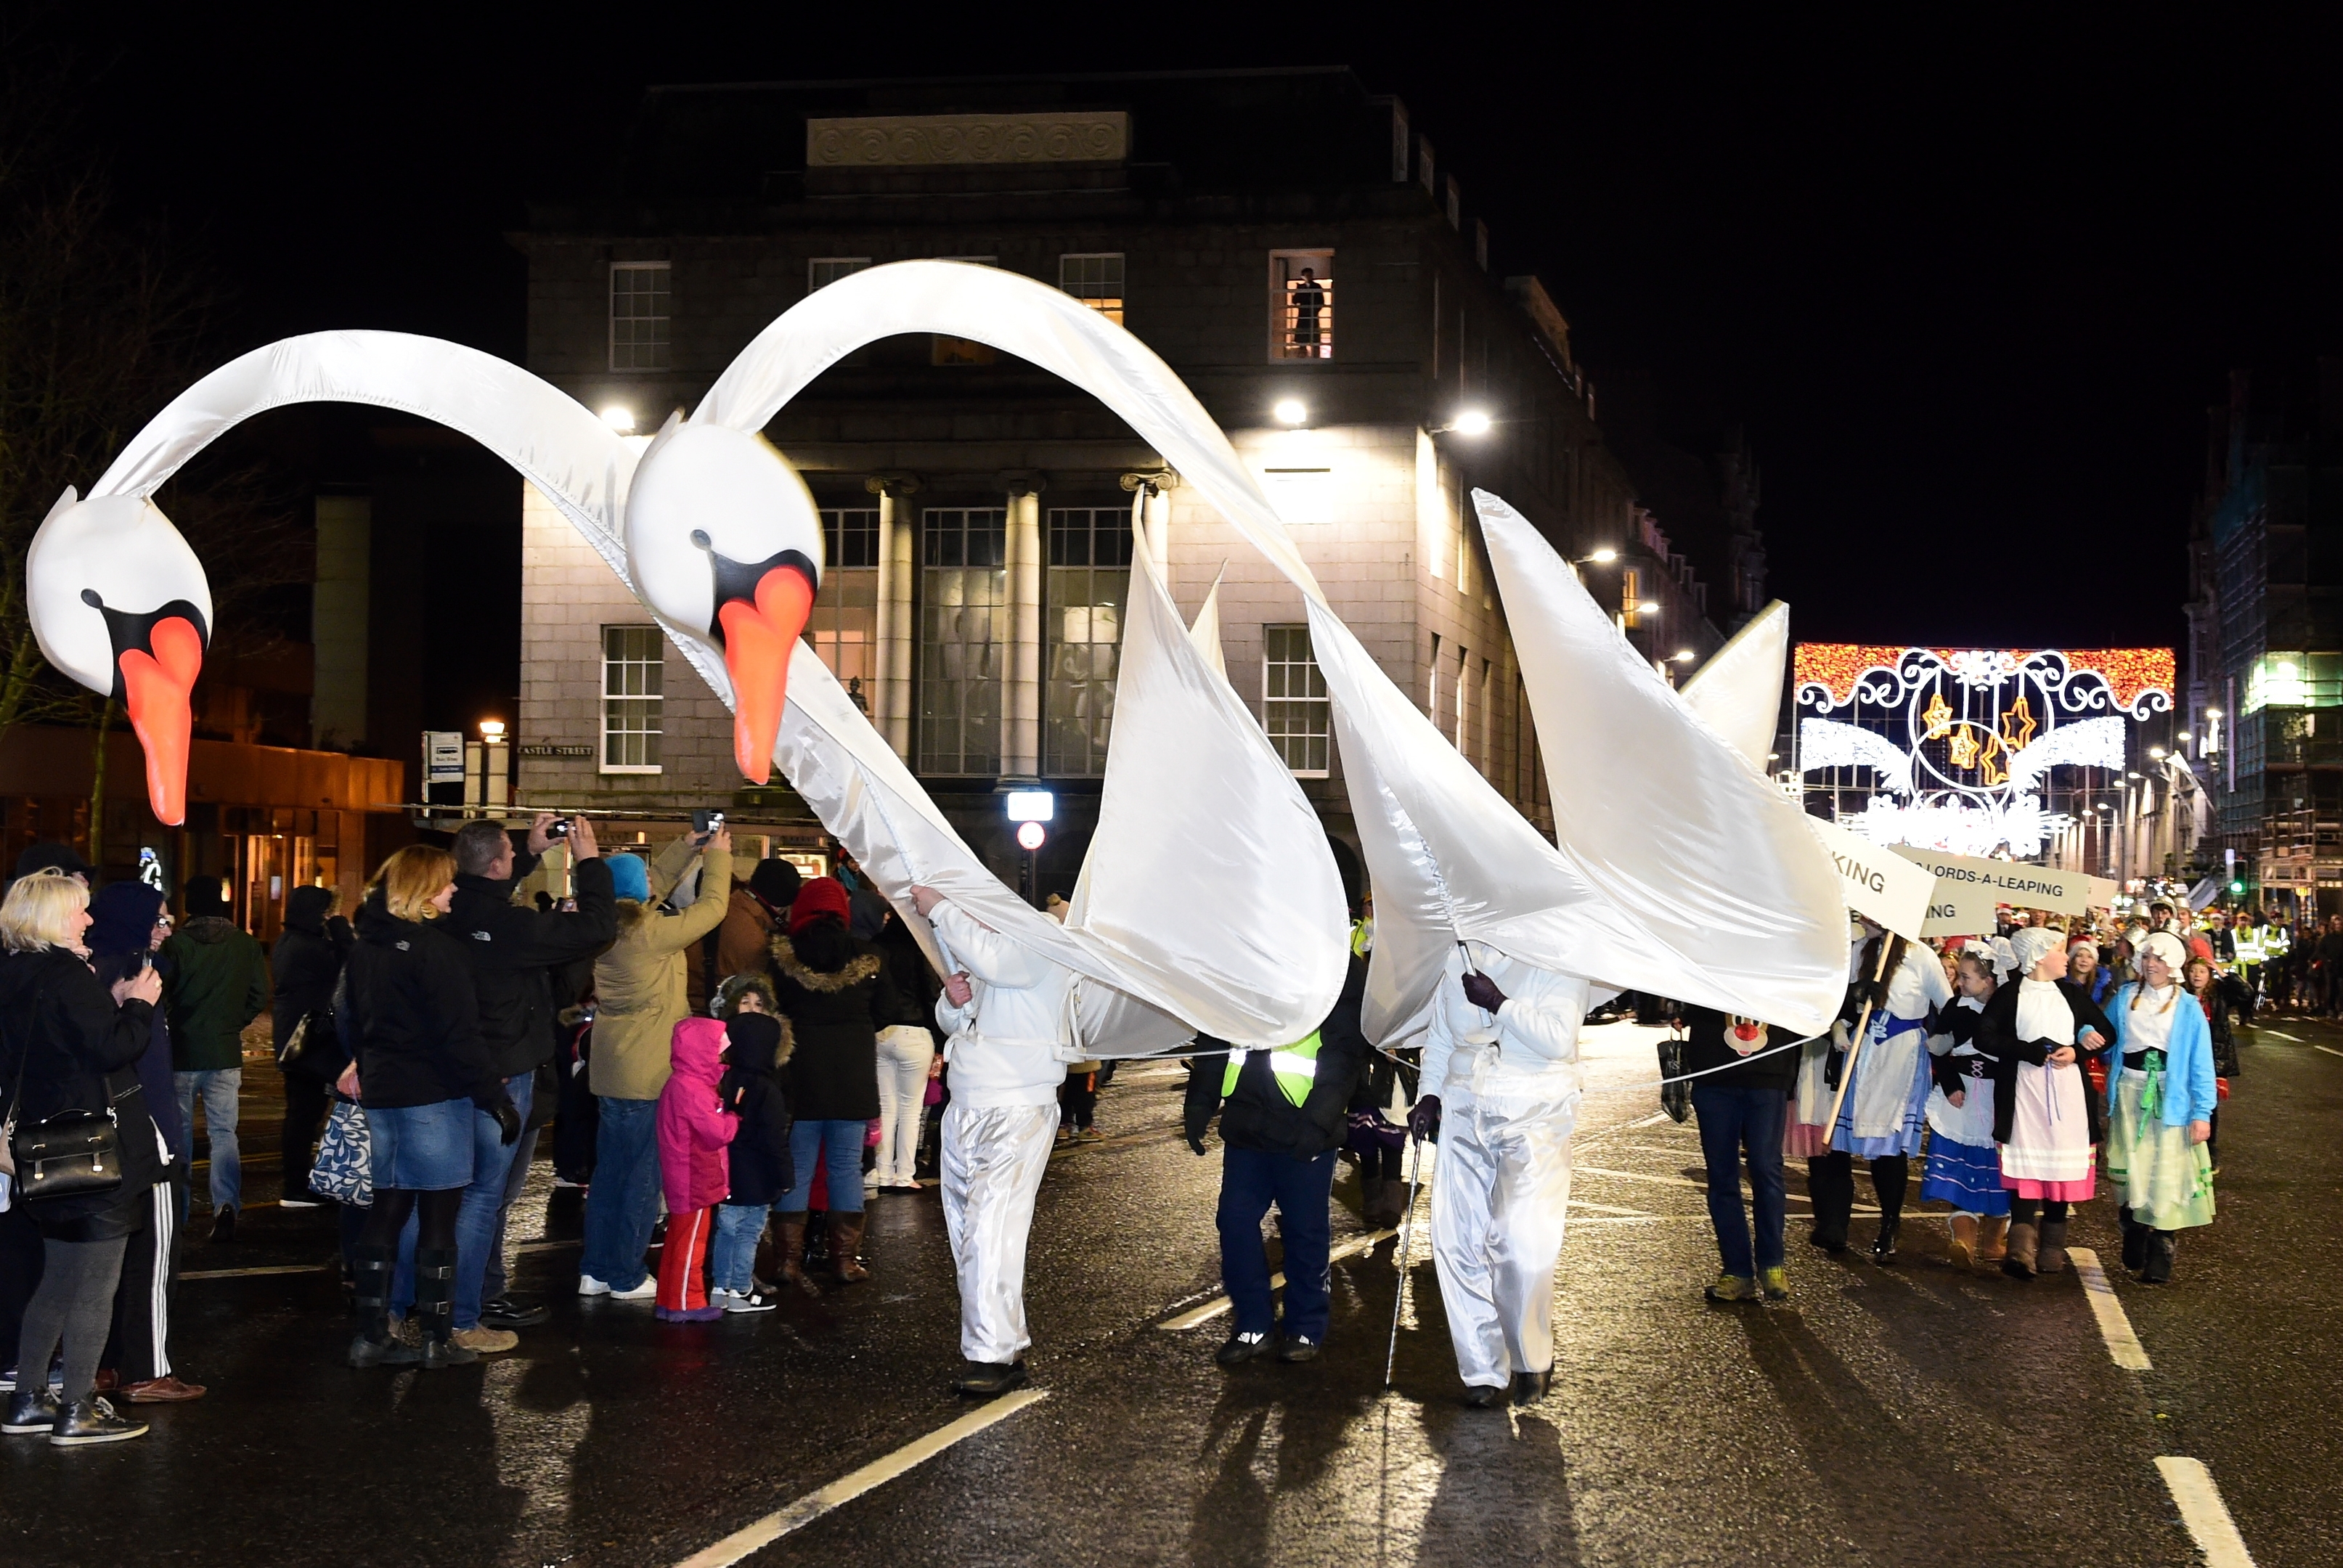 The city of Aberdeen Christmas Parade and switching on of the lights down Union Street. 